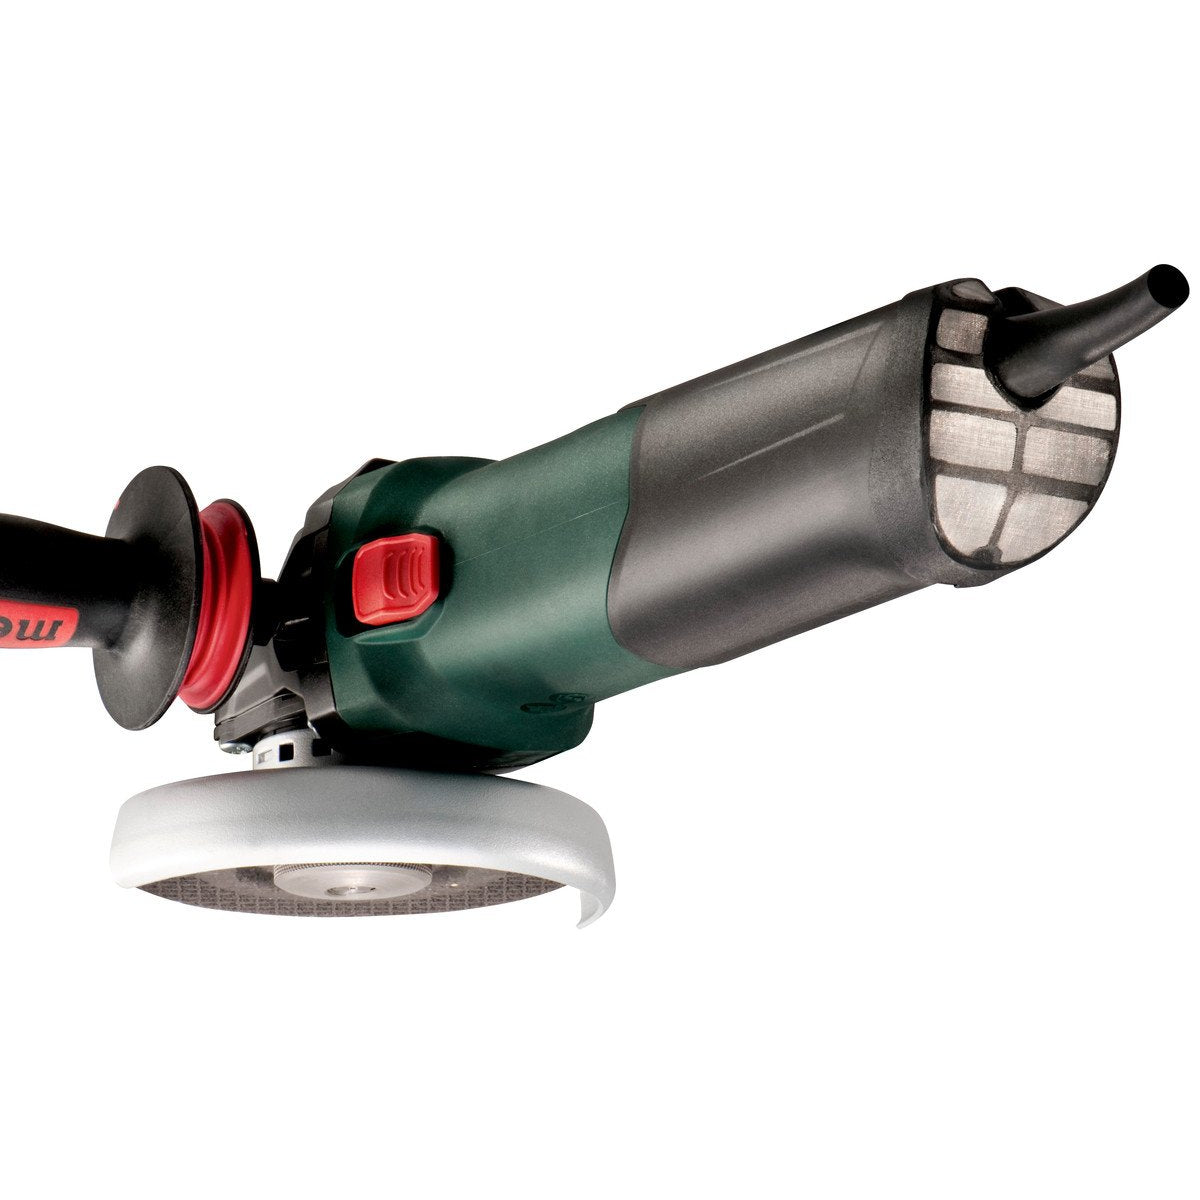 Metabo WEV 15-125 5" Quick Variable Speed Angle Grinder - 600468420